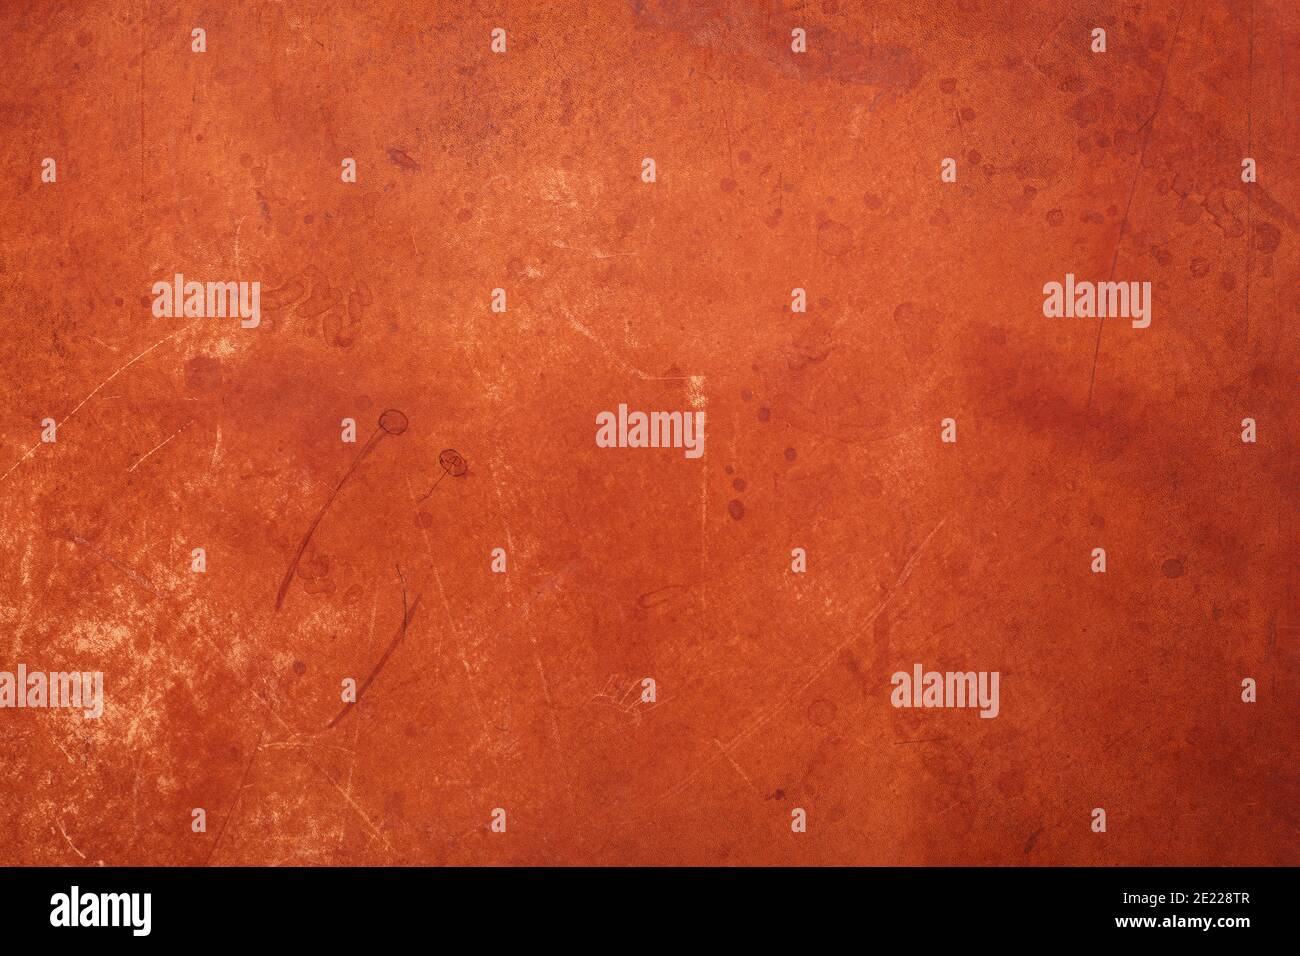 Brown, stained and worn leather texture background Stock Photo